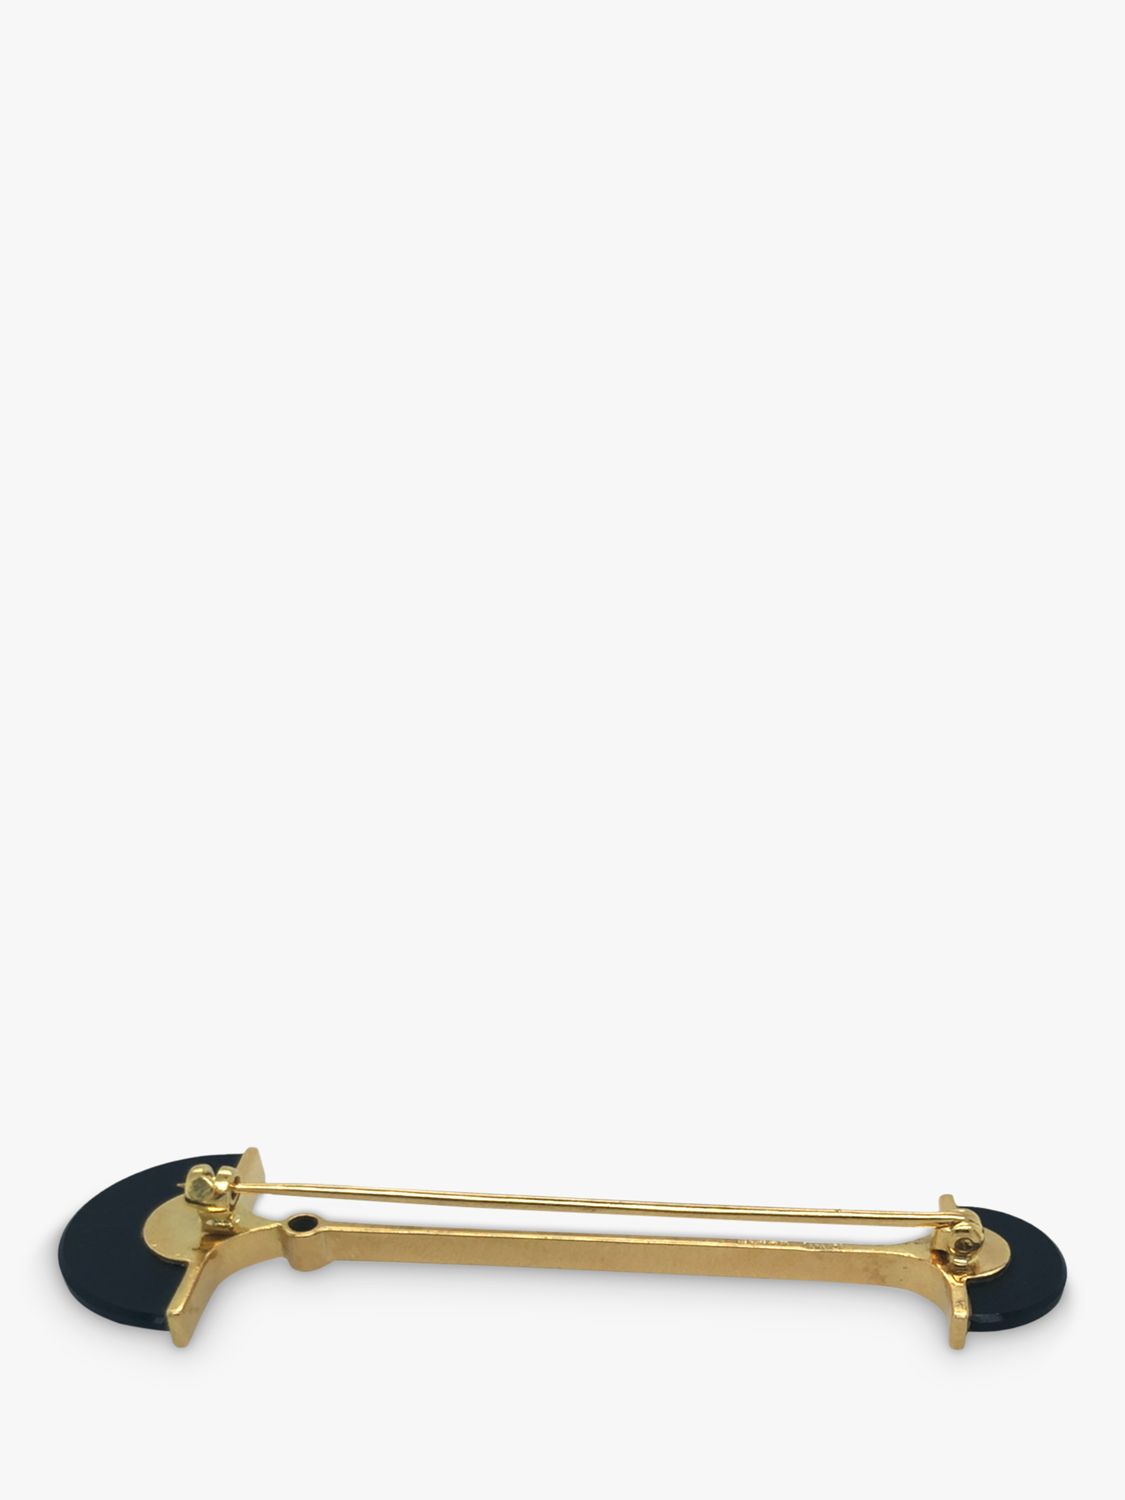 Buy Vintage Fine Jewellery Second Hand 18ct Gold Onyx and Diamond Bar Brooch, Dated Sheffield 1987 Online at johnlewis.com